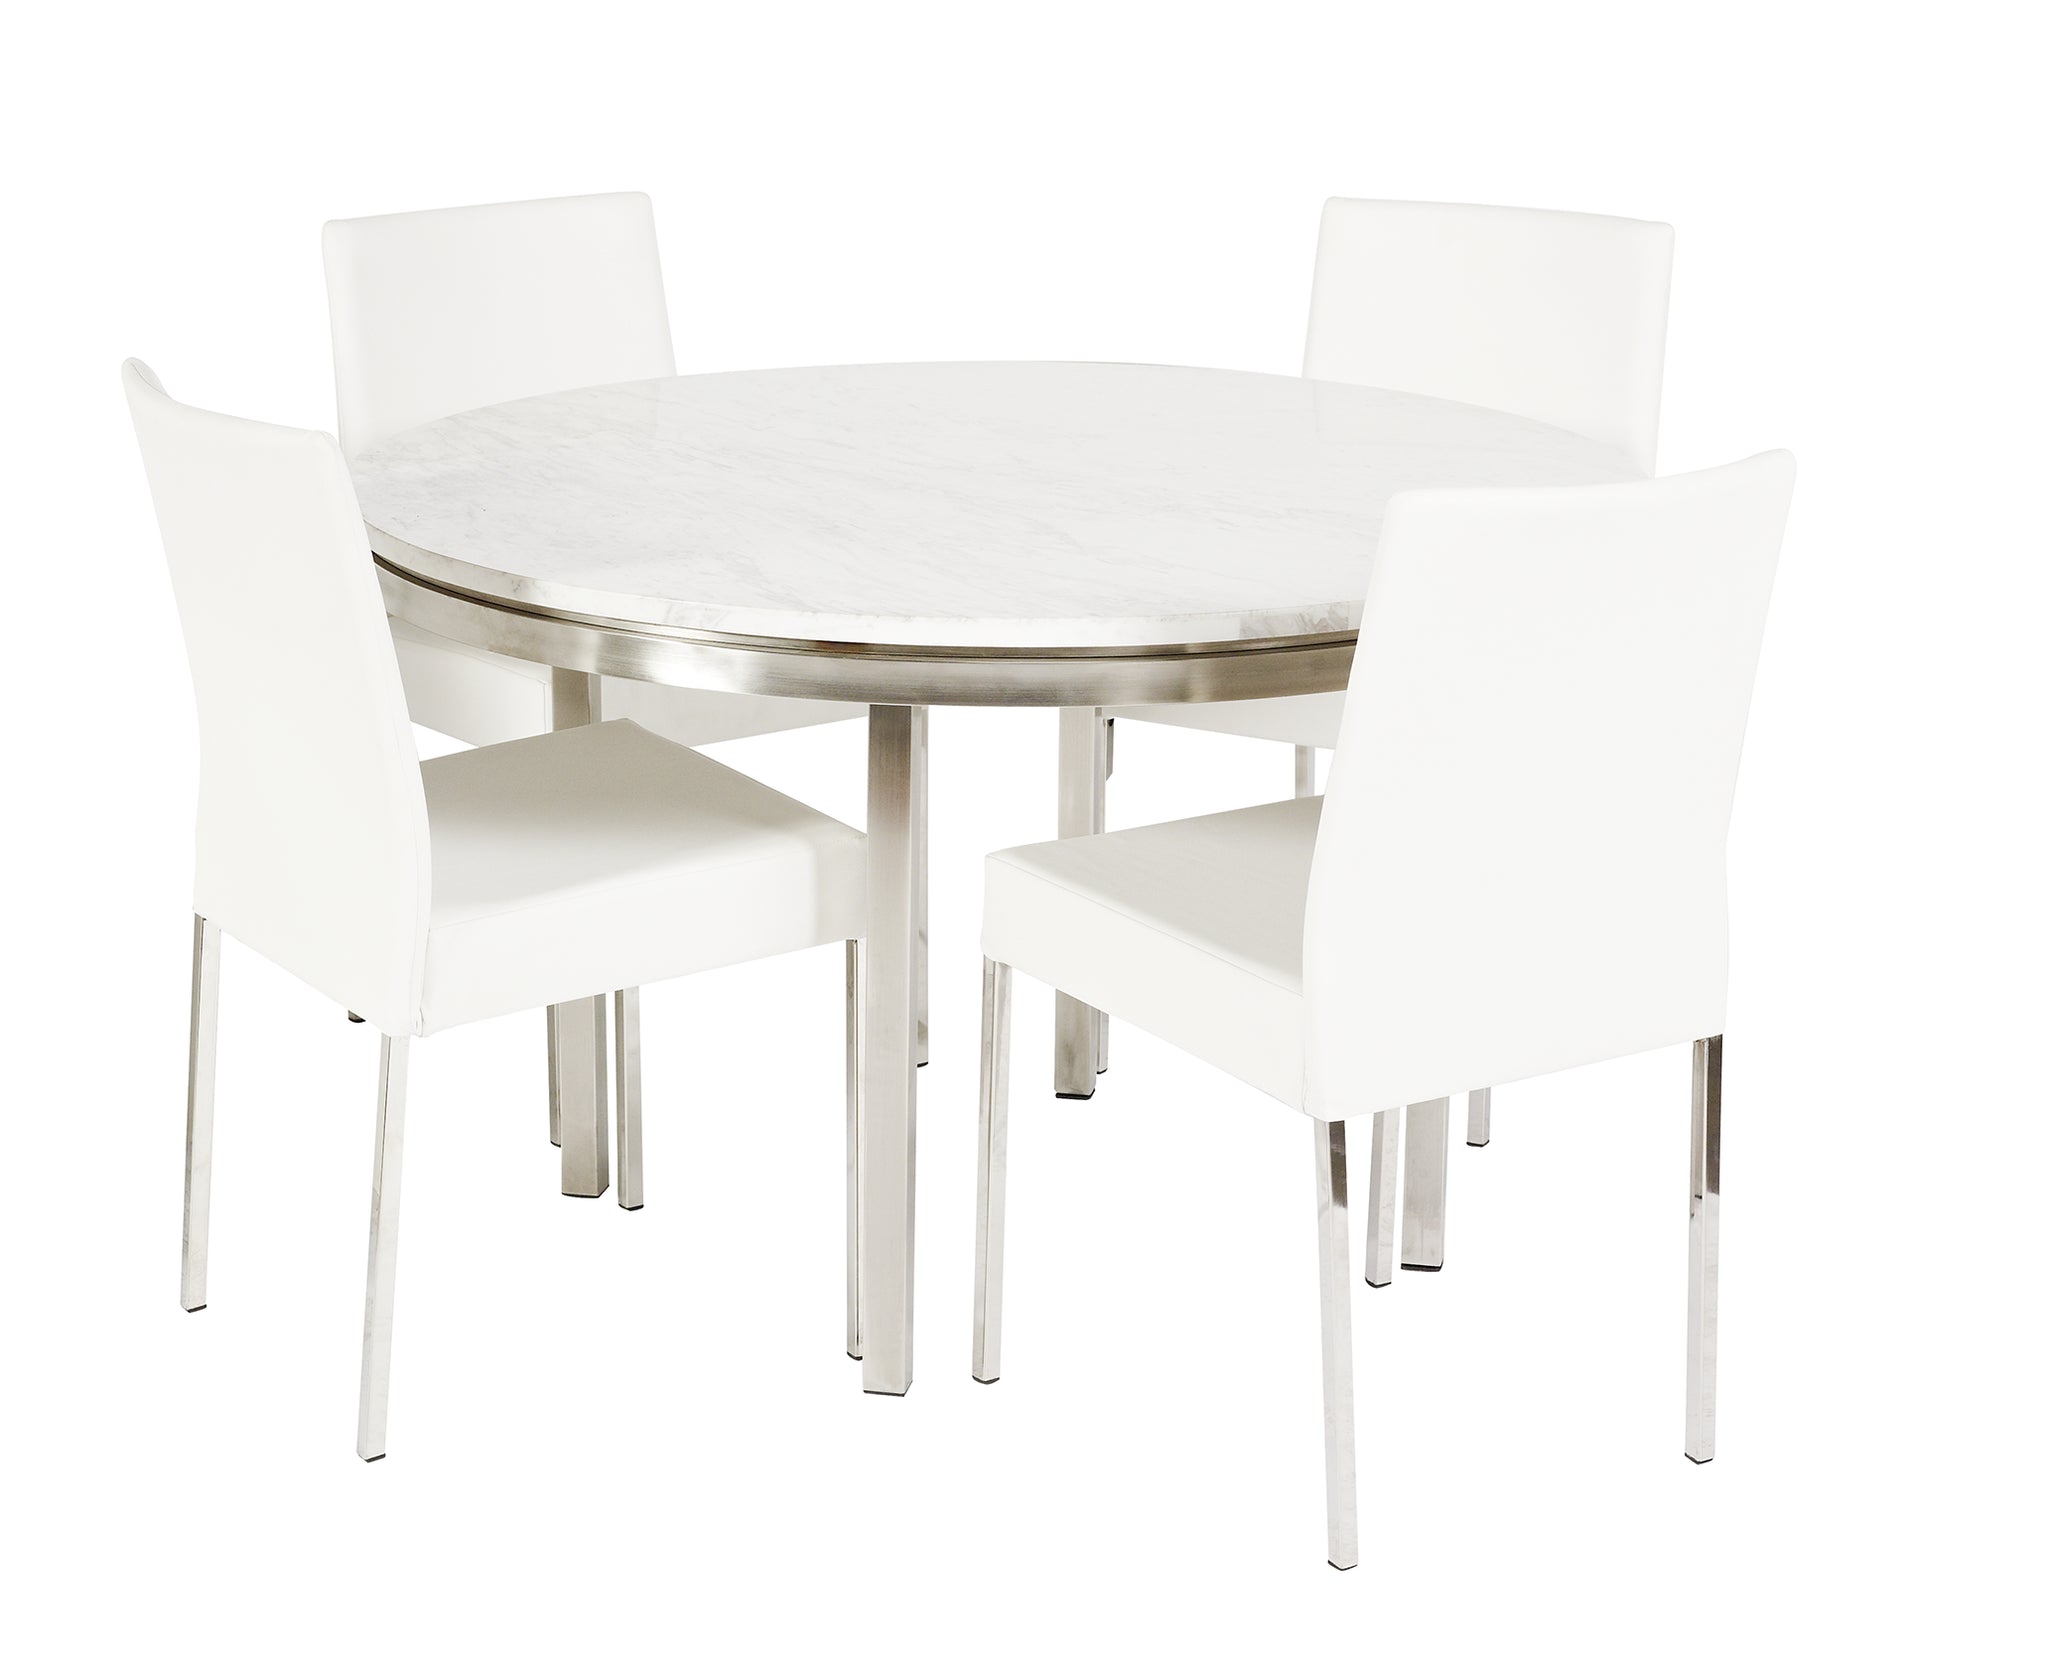 Lilia Round White Marble Top Dining Table | Modernised Living